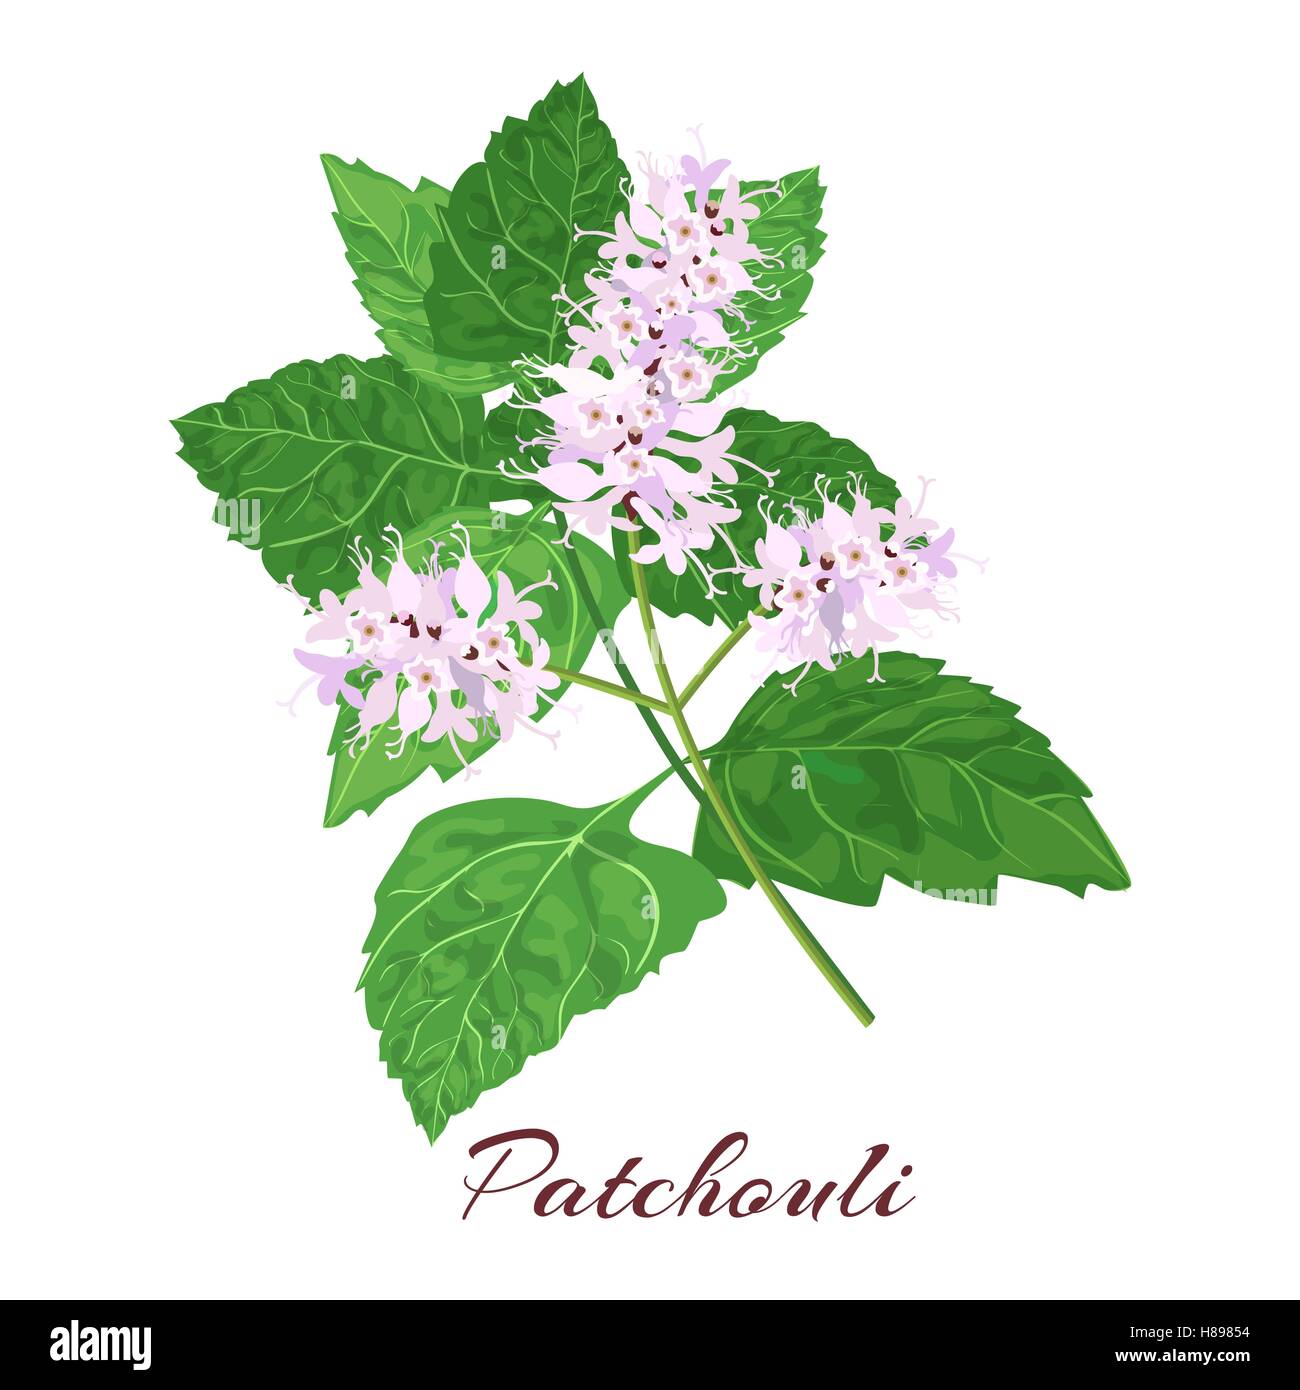 Patchouli known as Pogostemon cablini. Vector illustration on white background. Stock Vector